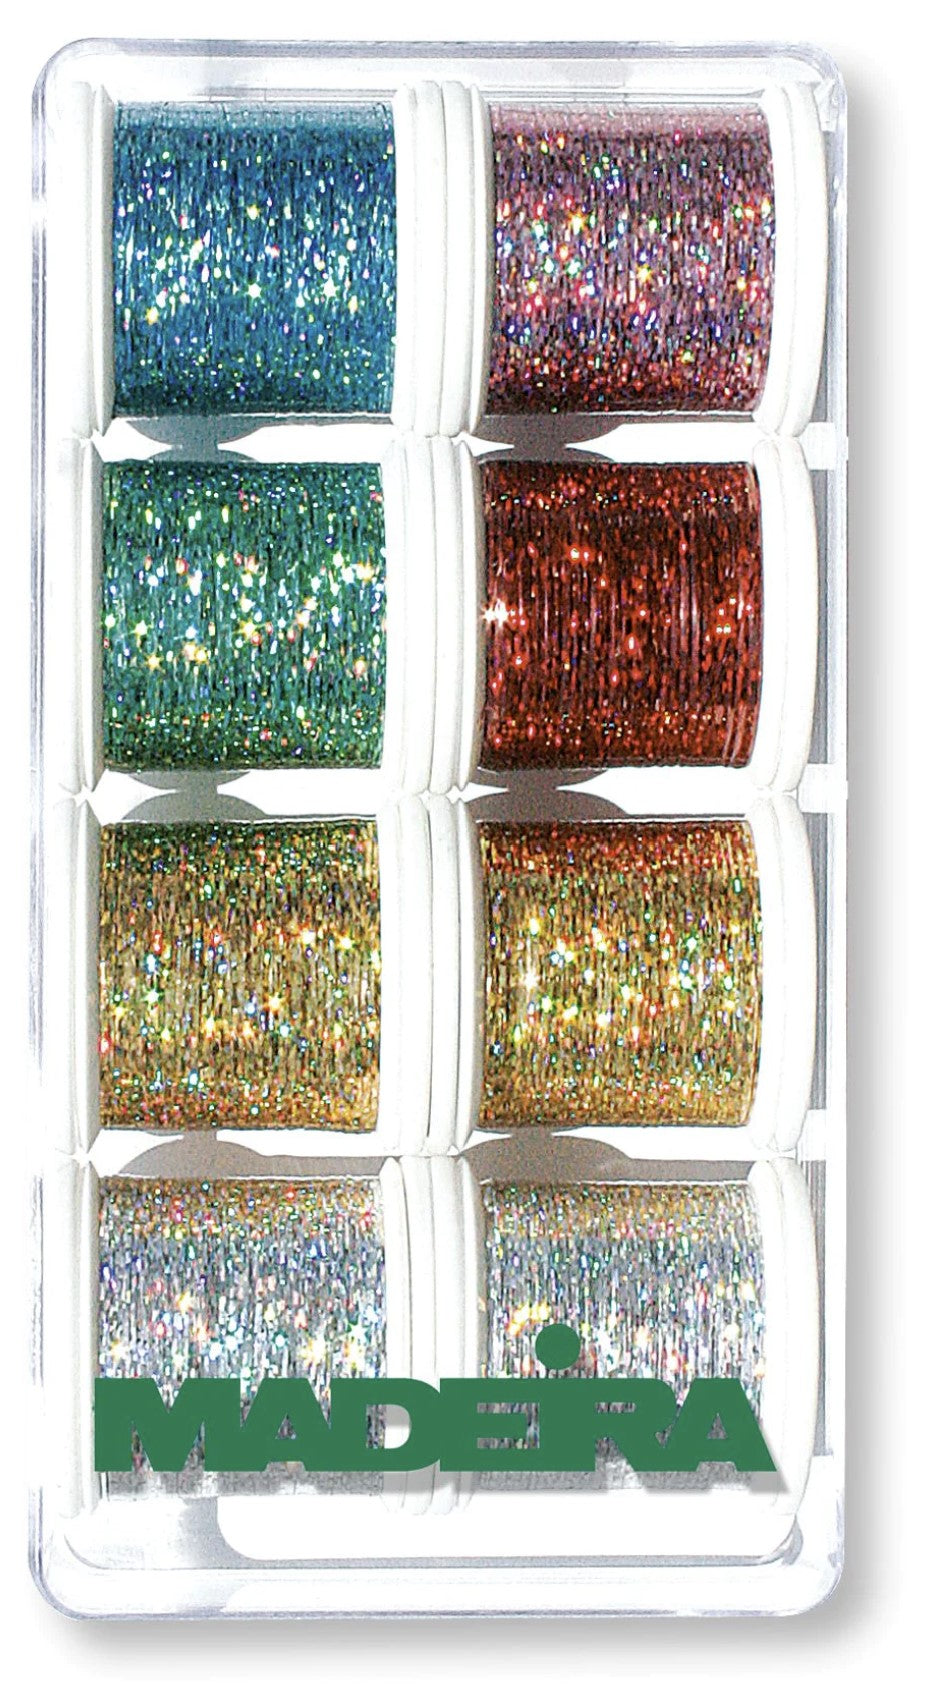 Assortment Metallic Spectra  -- Machine Embroidery Threads -- Gift Box, 8 units (#40 Weight, Ref. MA8013) by MADEIRA®